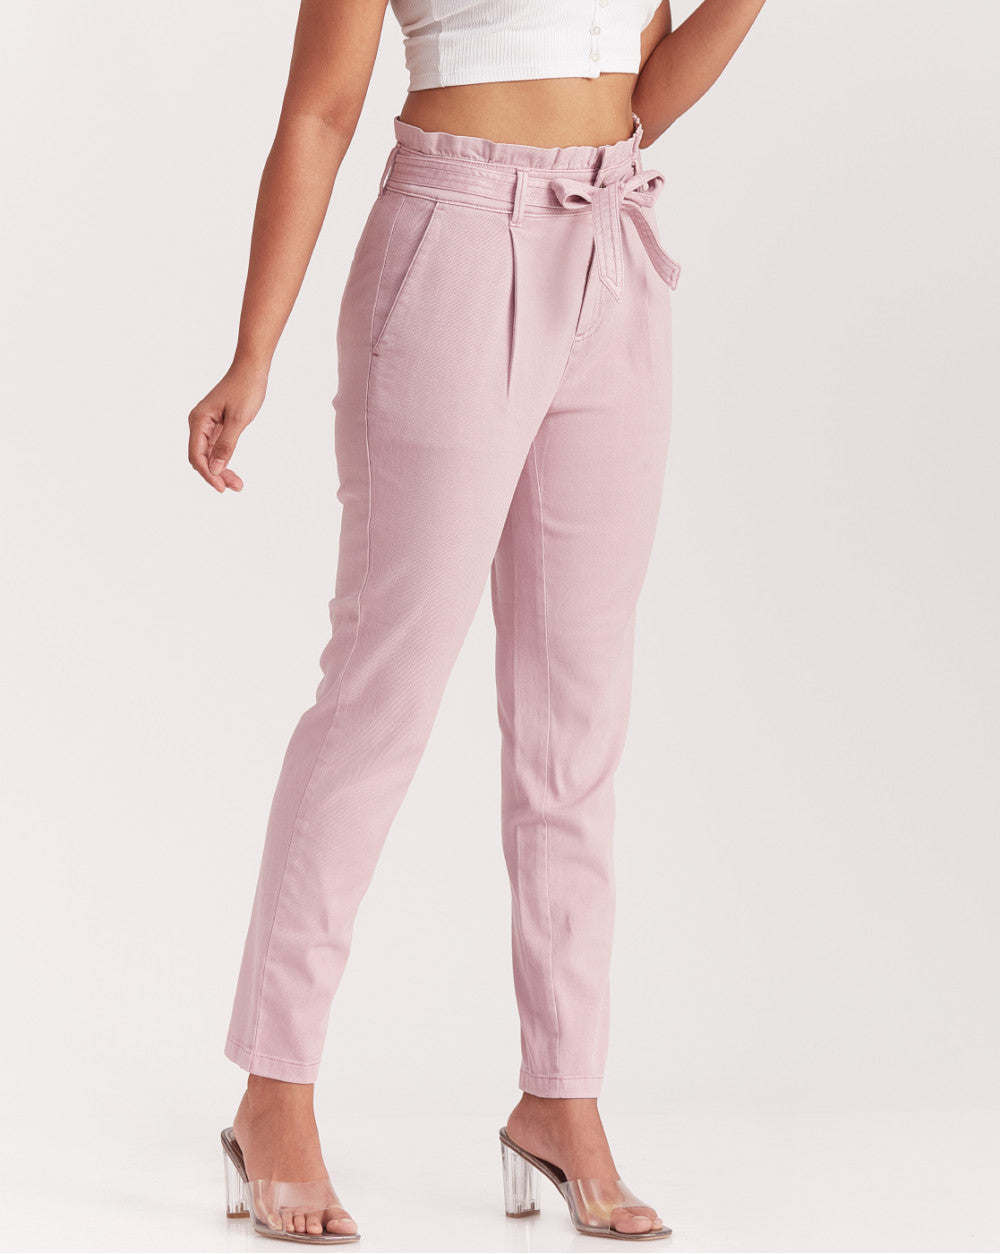 Tapered Fit Juan Tapered Garment-Dyed Pants - Lush Lilac